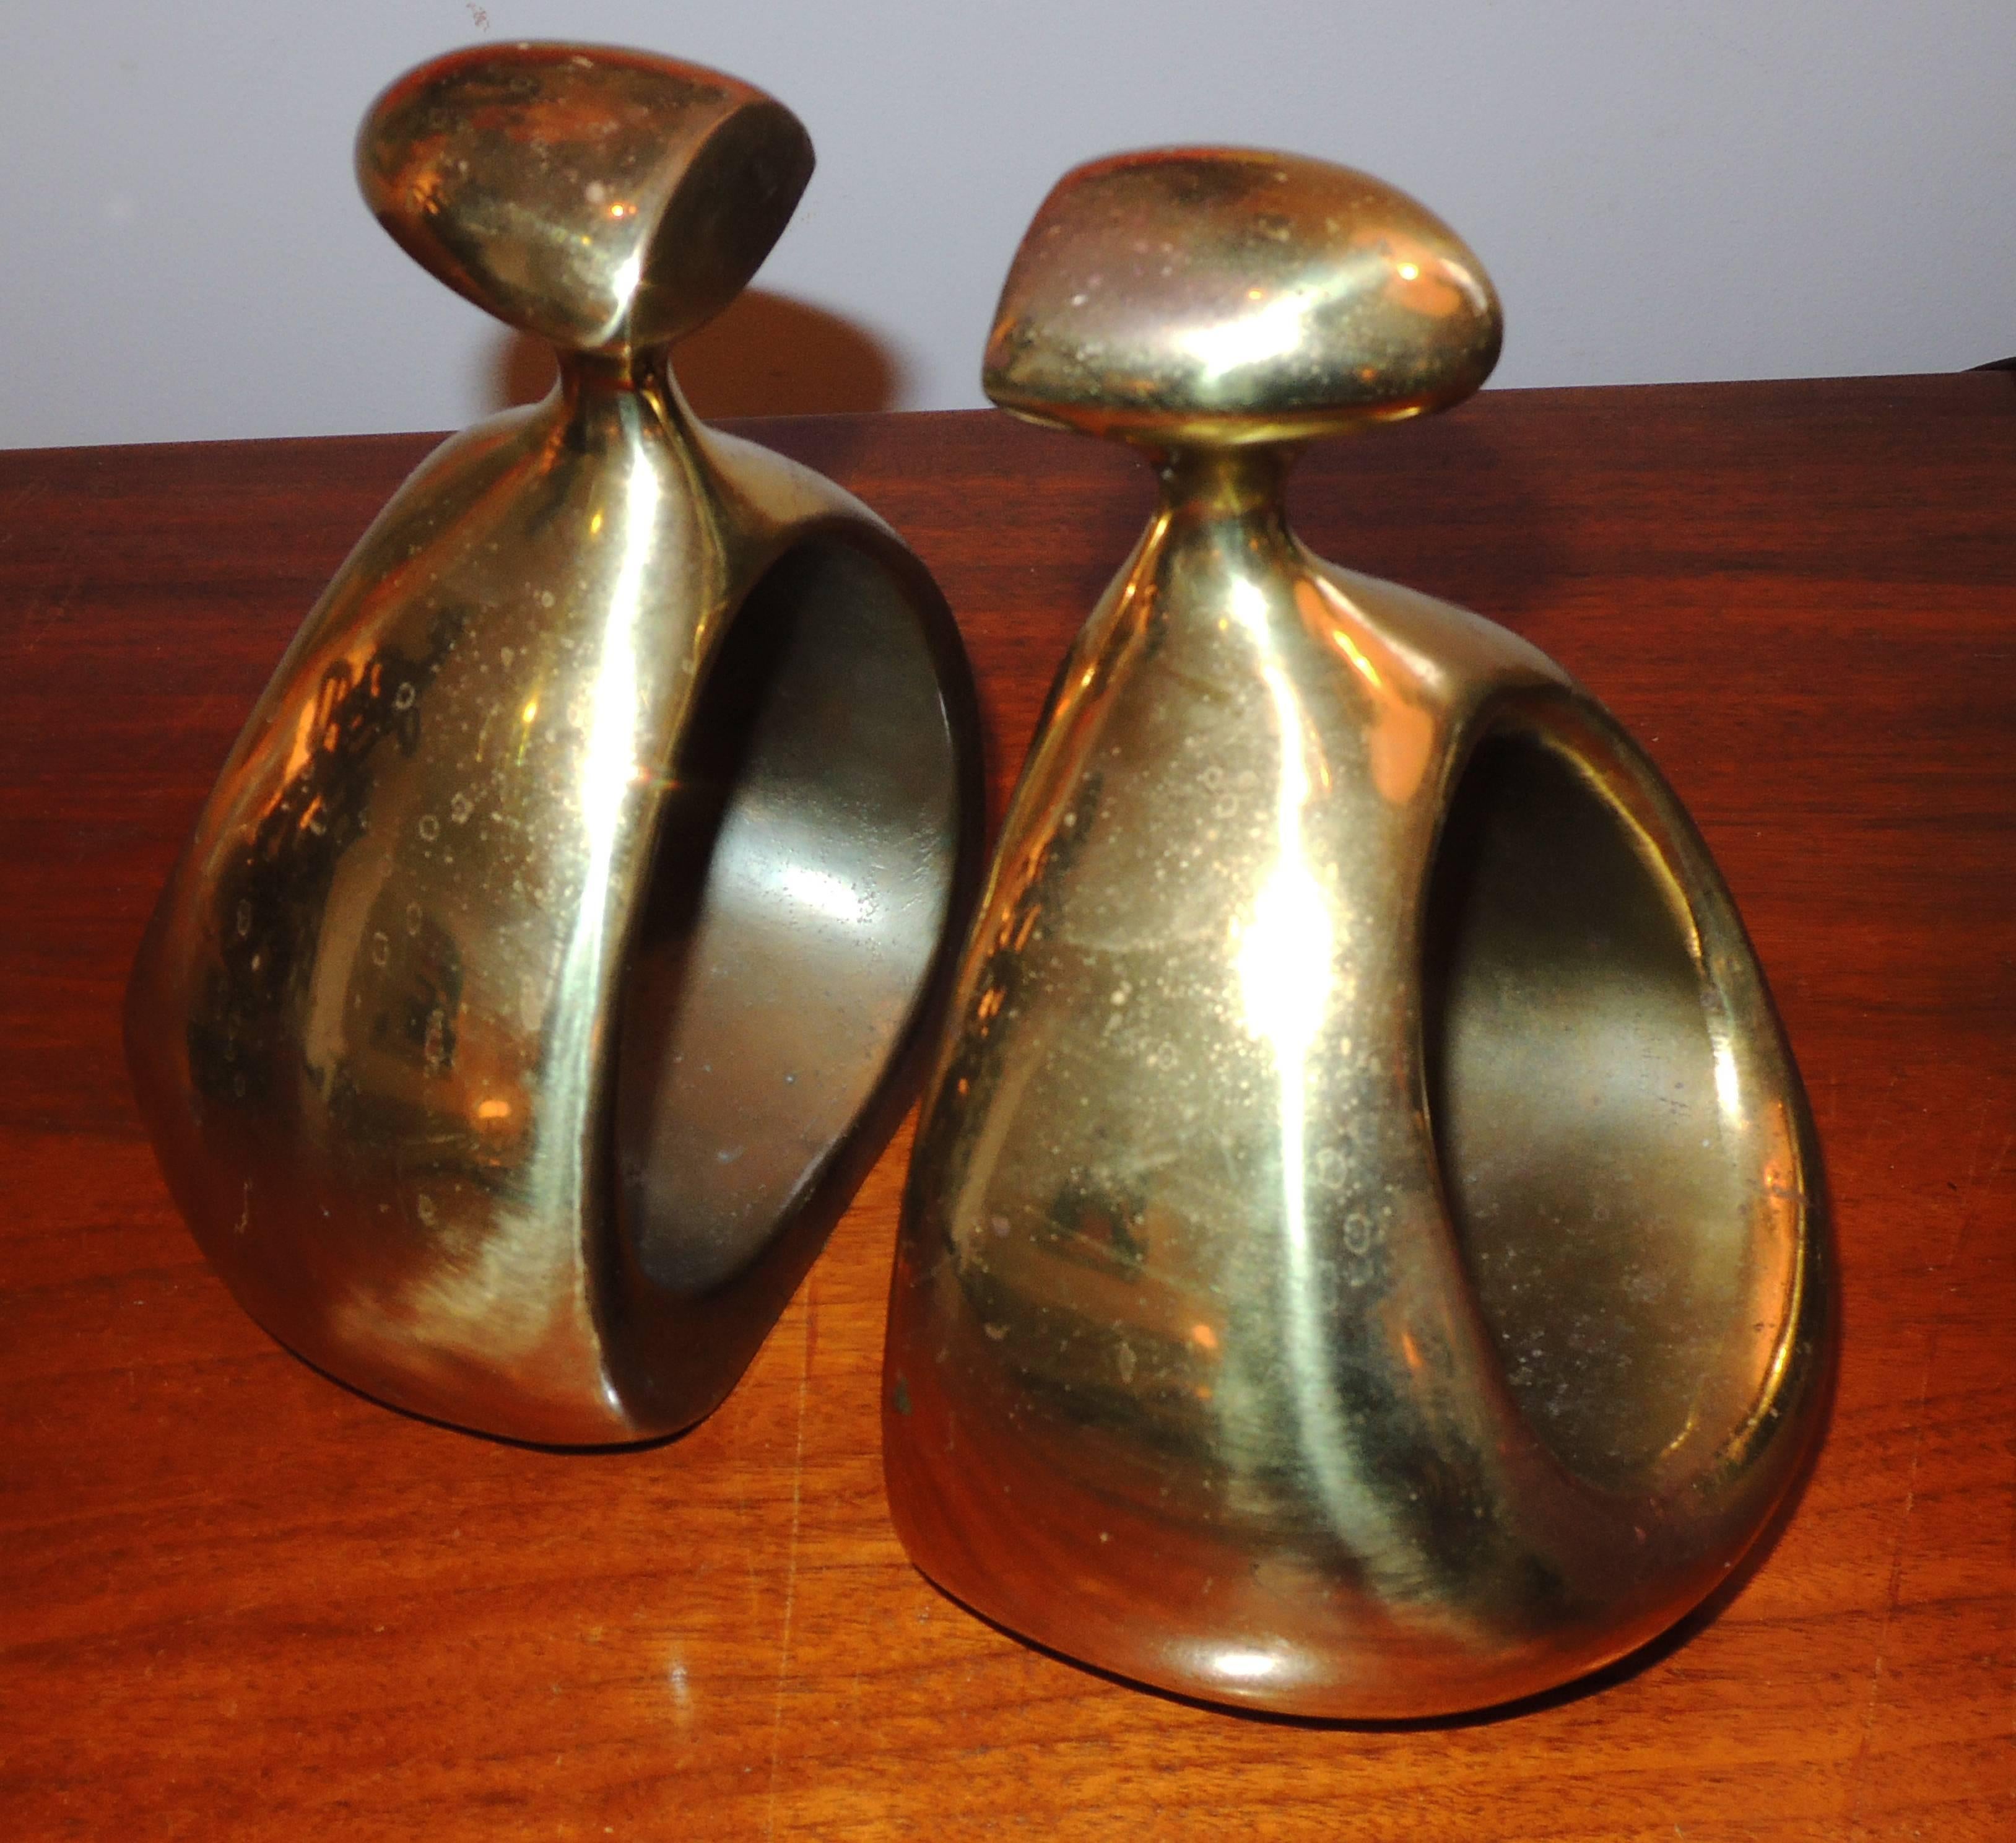 Pair of brass bookends by Ben Seibel, circa 1950.
Brass is in good condition, no pitting.